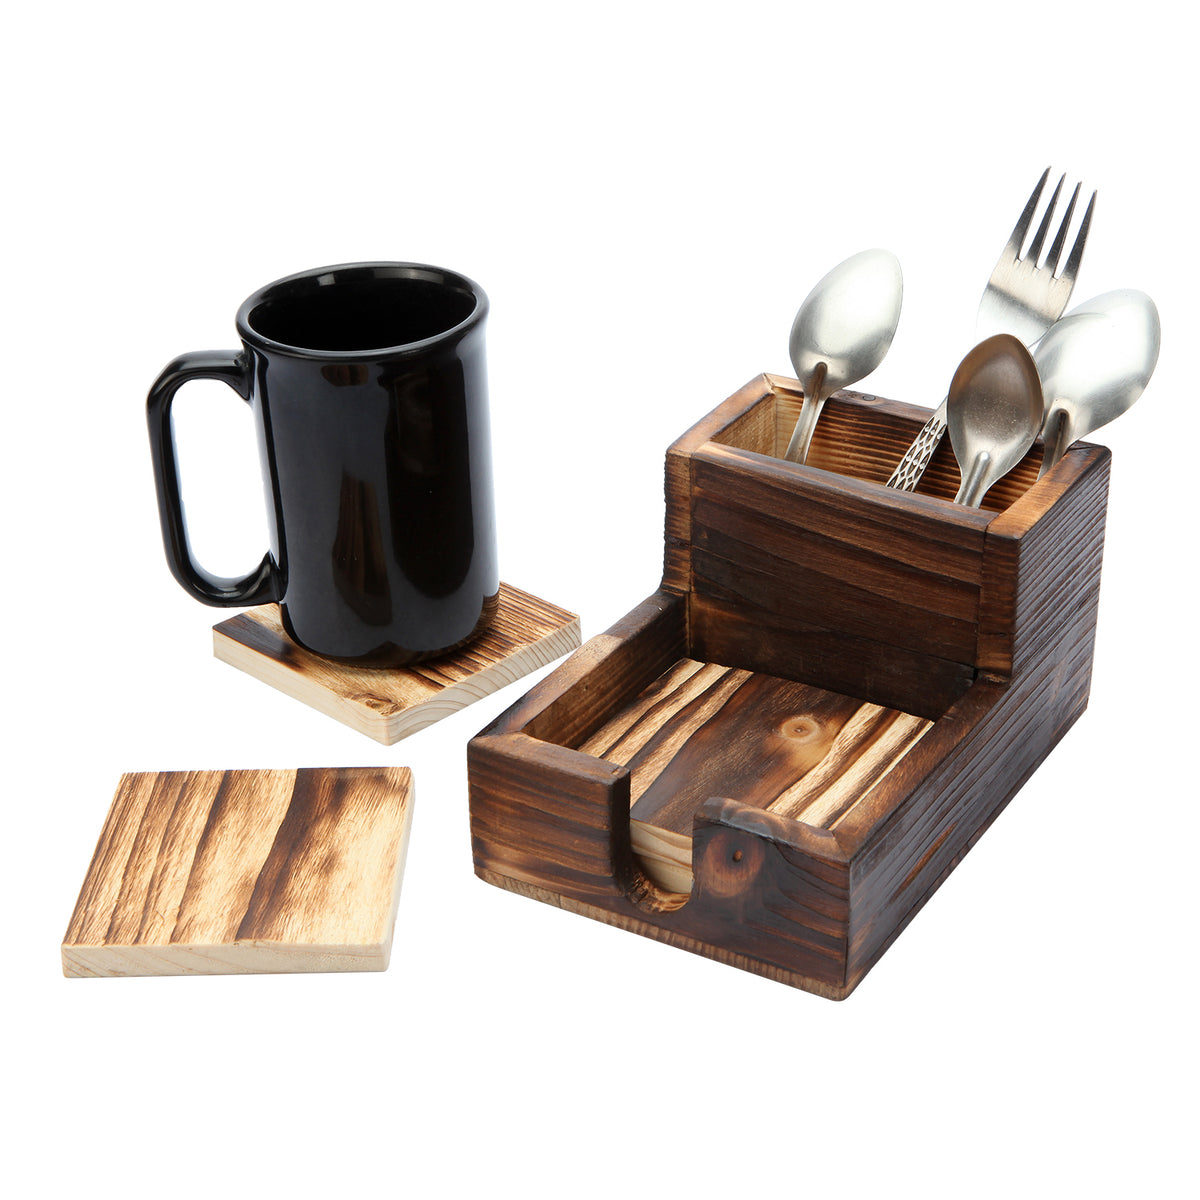 Rustic Wood Textured Cutlery Holder And Set Of 4 Coaster With Gold Motif | Home / Office Organisers